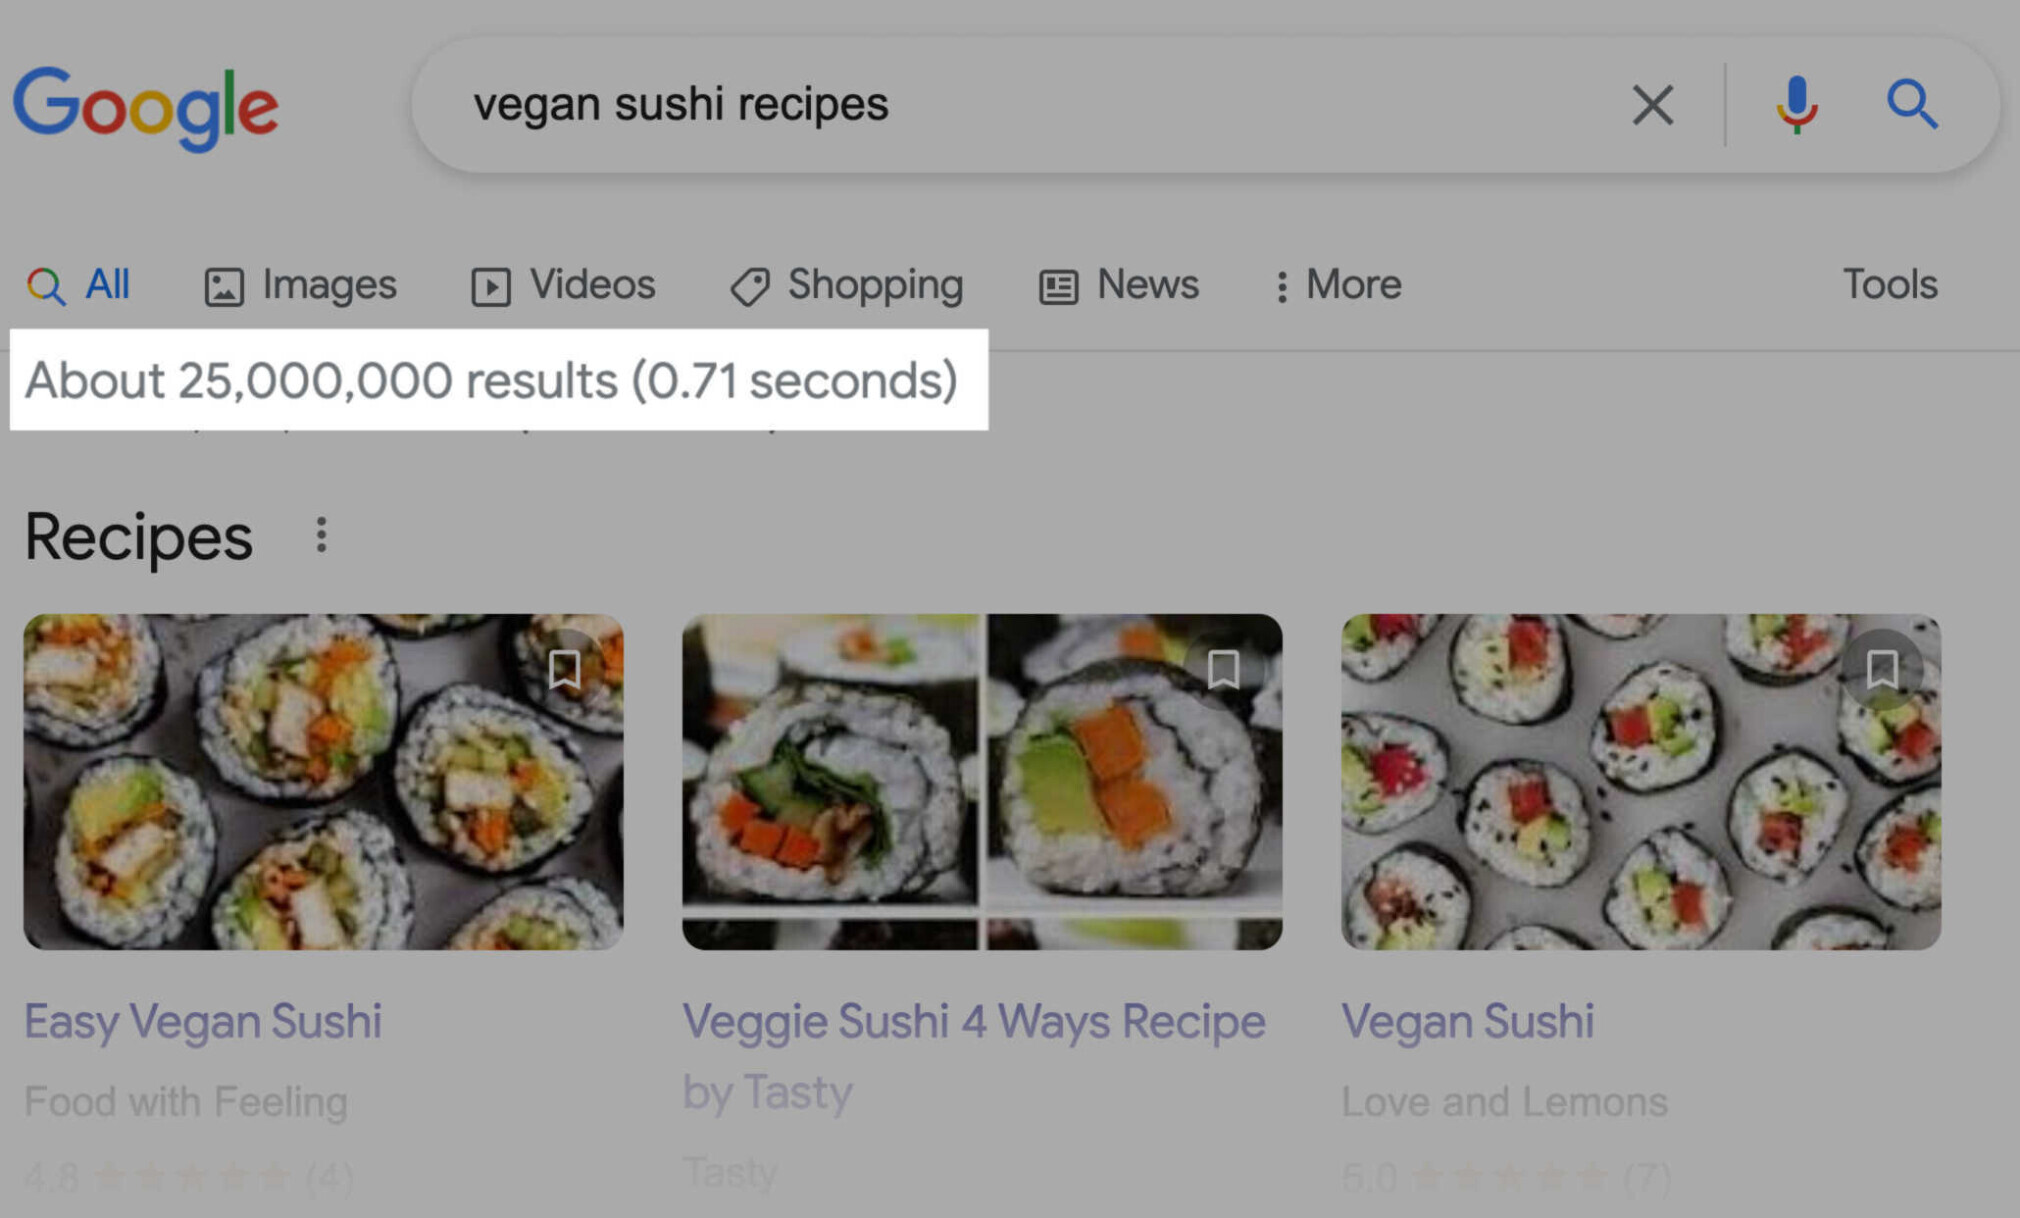 Search results for "vegan sushi recipes"